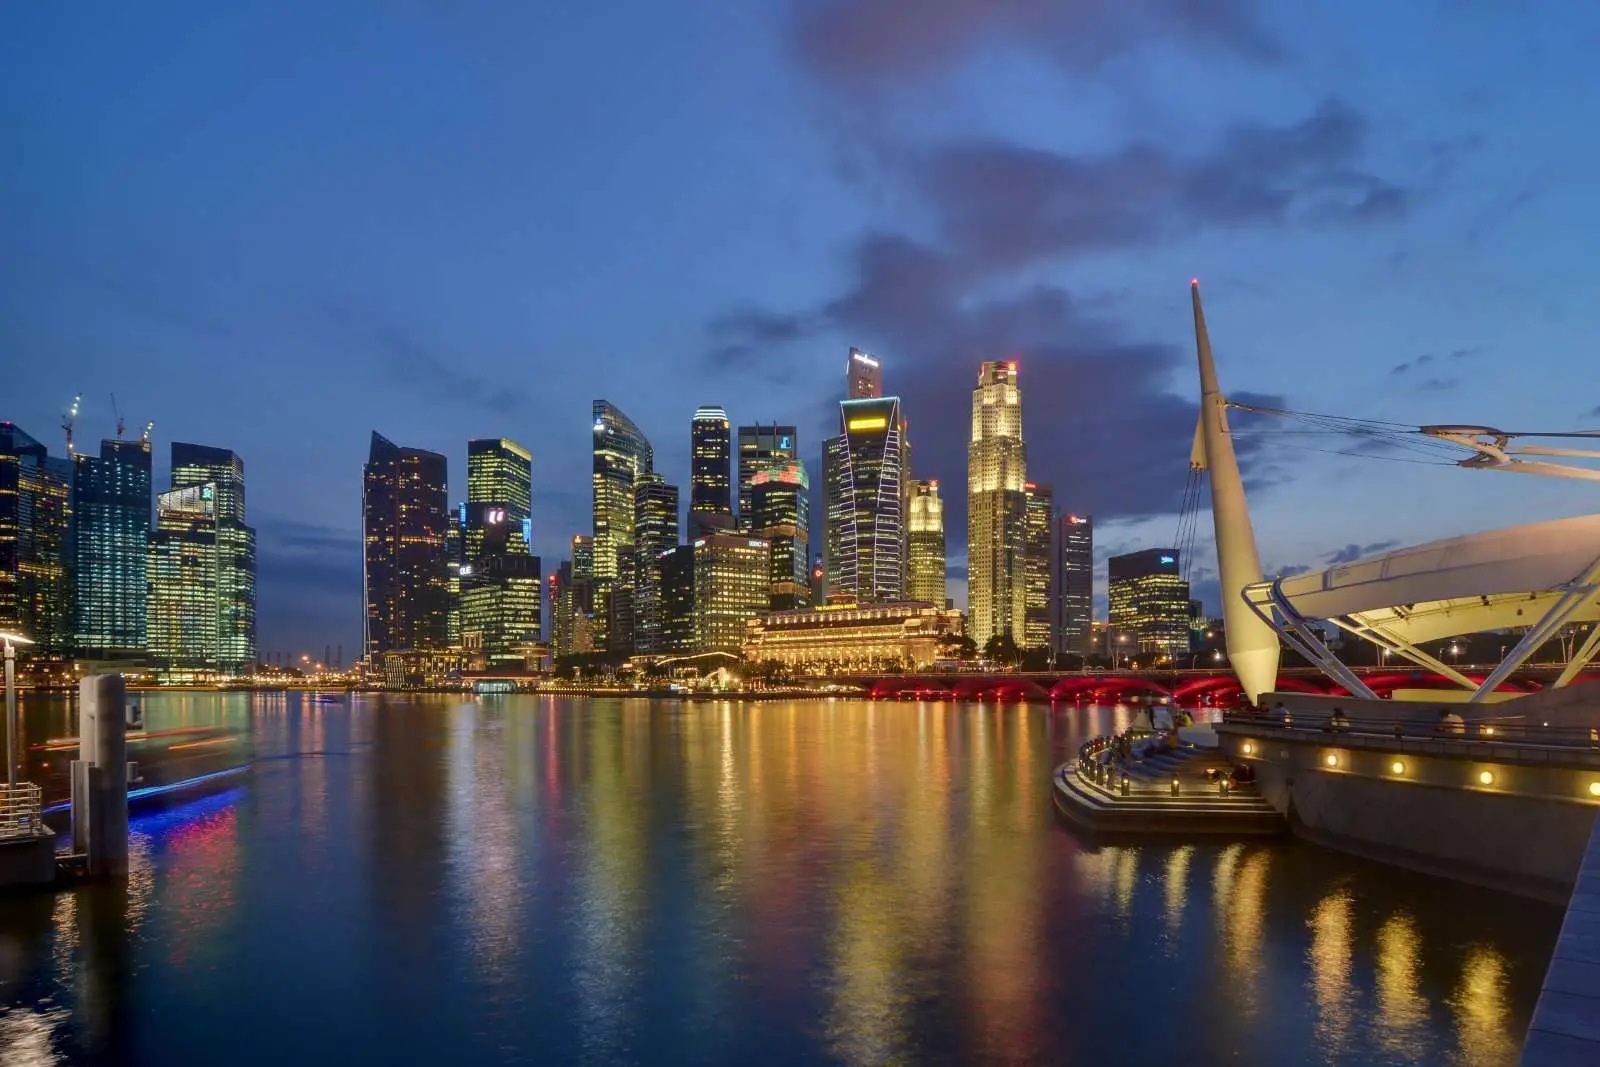 Singapore - best holiday destination in Asia